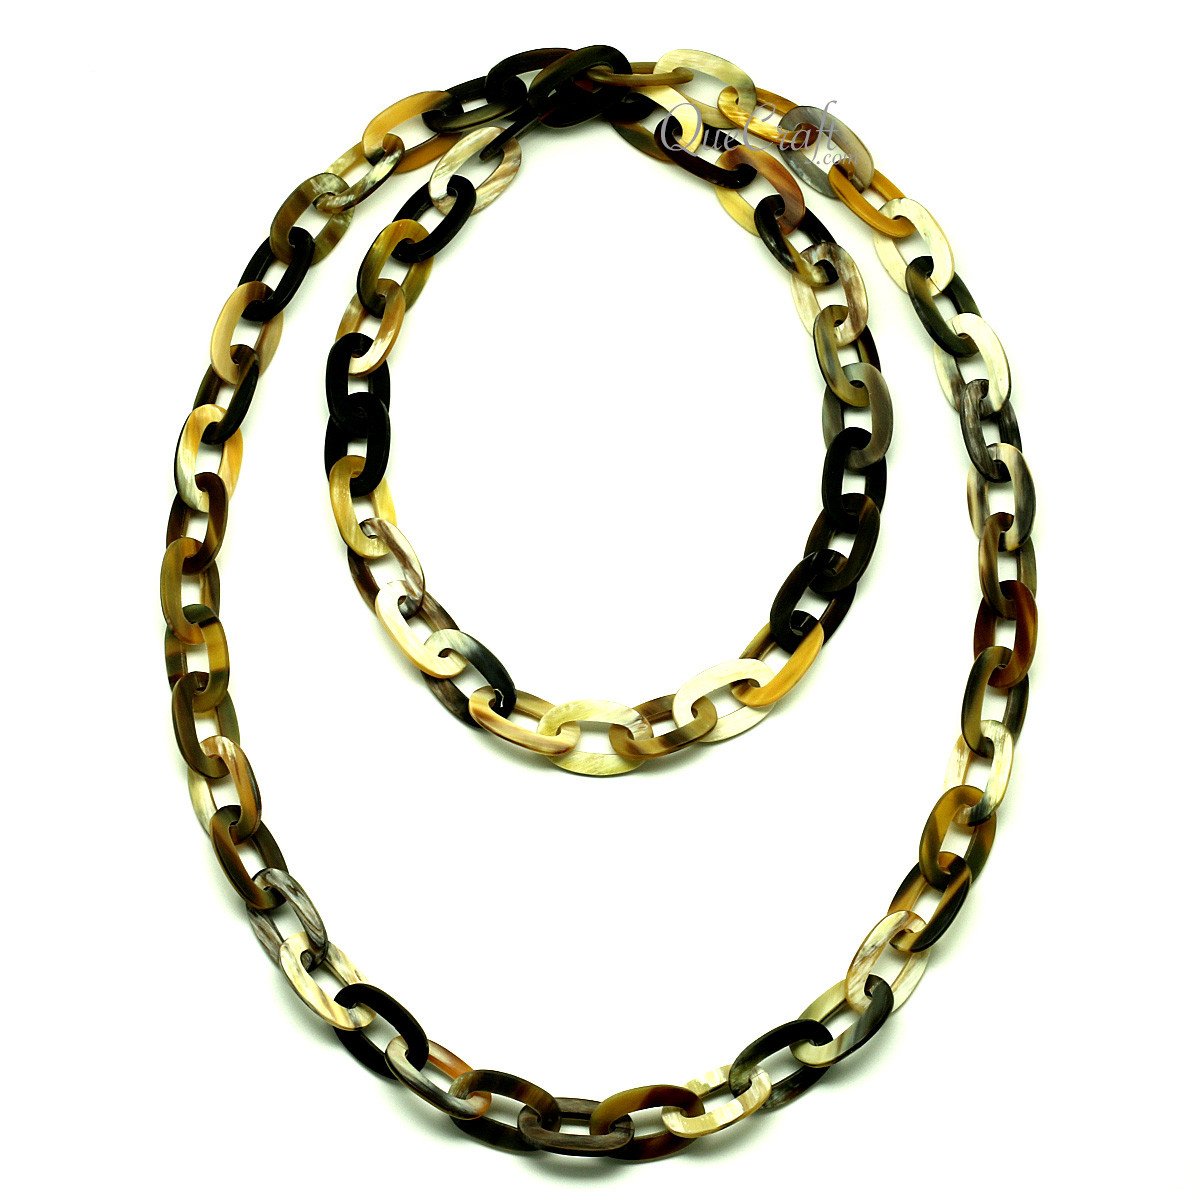 Horn Chain Necklace #12894 - HORN JEWELRY